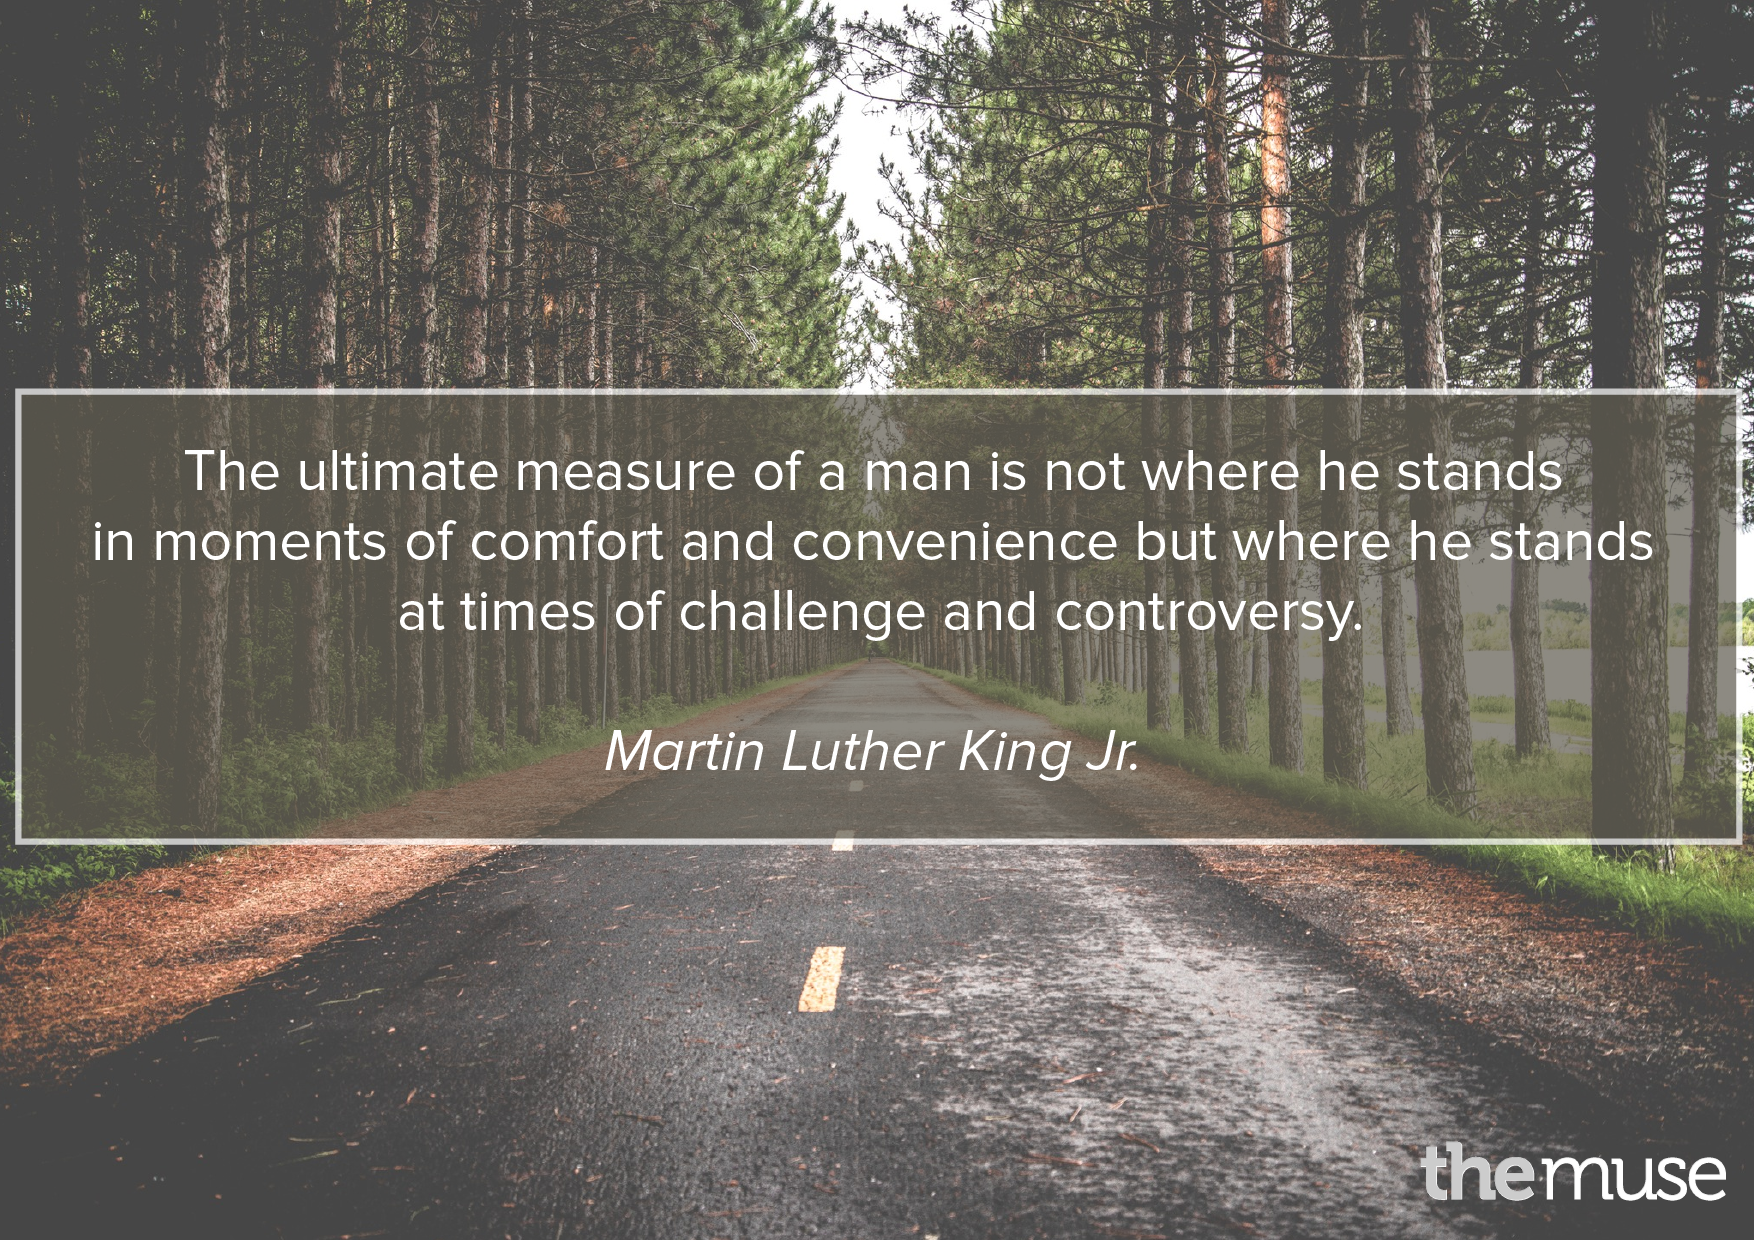 The ultimate measure of a man is not where he stands in moments of comfort and convenience, but where he stands at times of challenge and controversy. Martin Luther King, Jr.